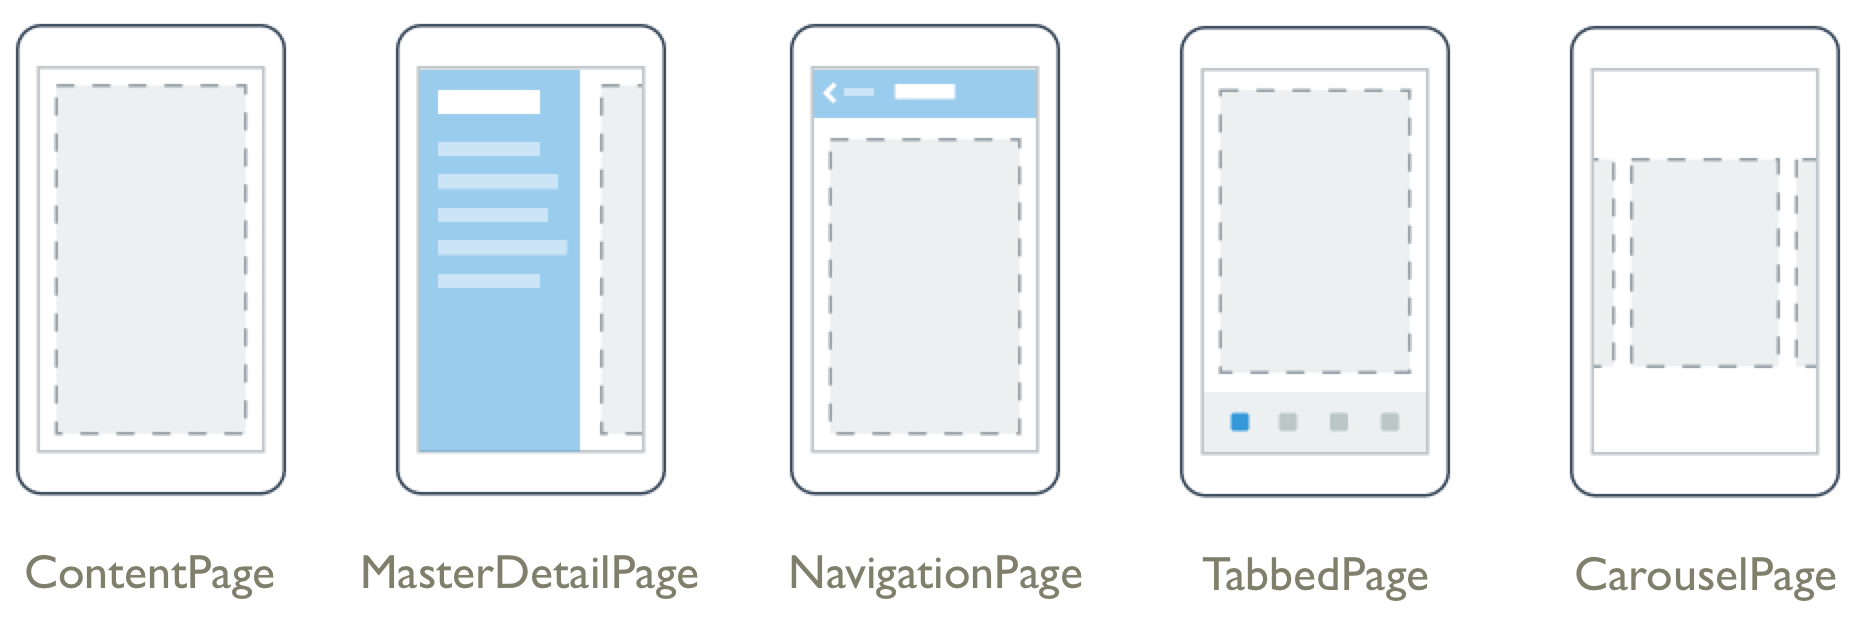 Xamarin.Forms Types de pages